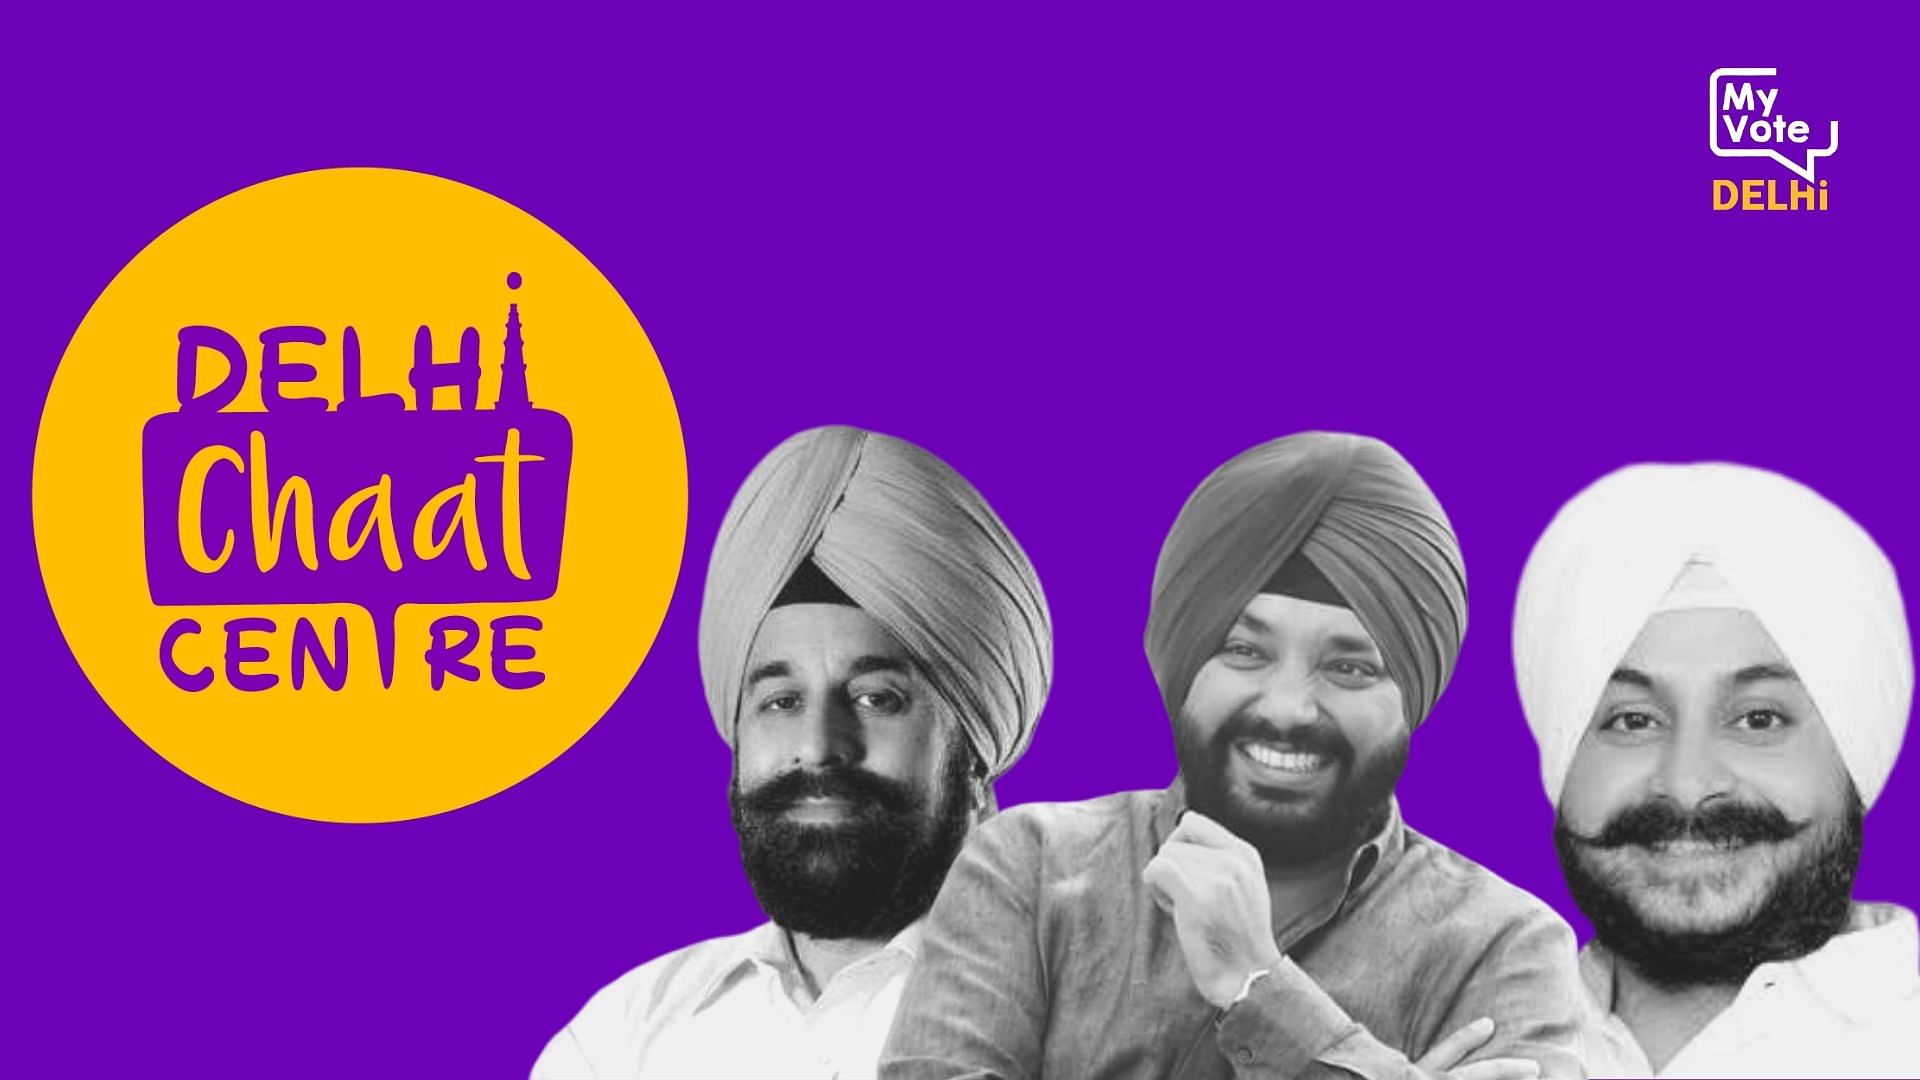 With the Shiromani Akali Dal out of the equation, who are Sikhs most likely to side with these Delhi Elections?